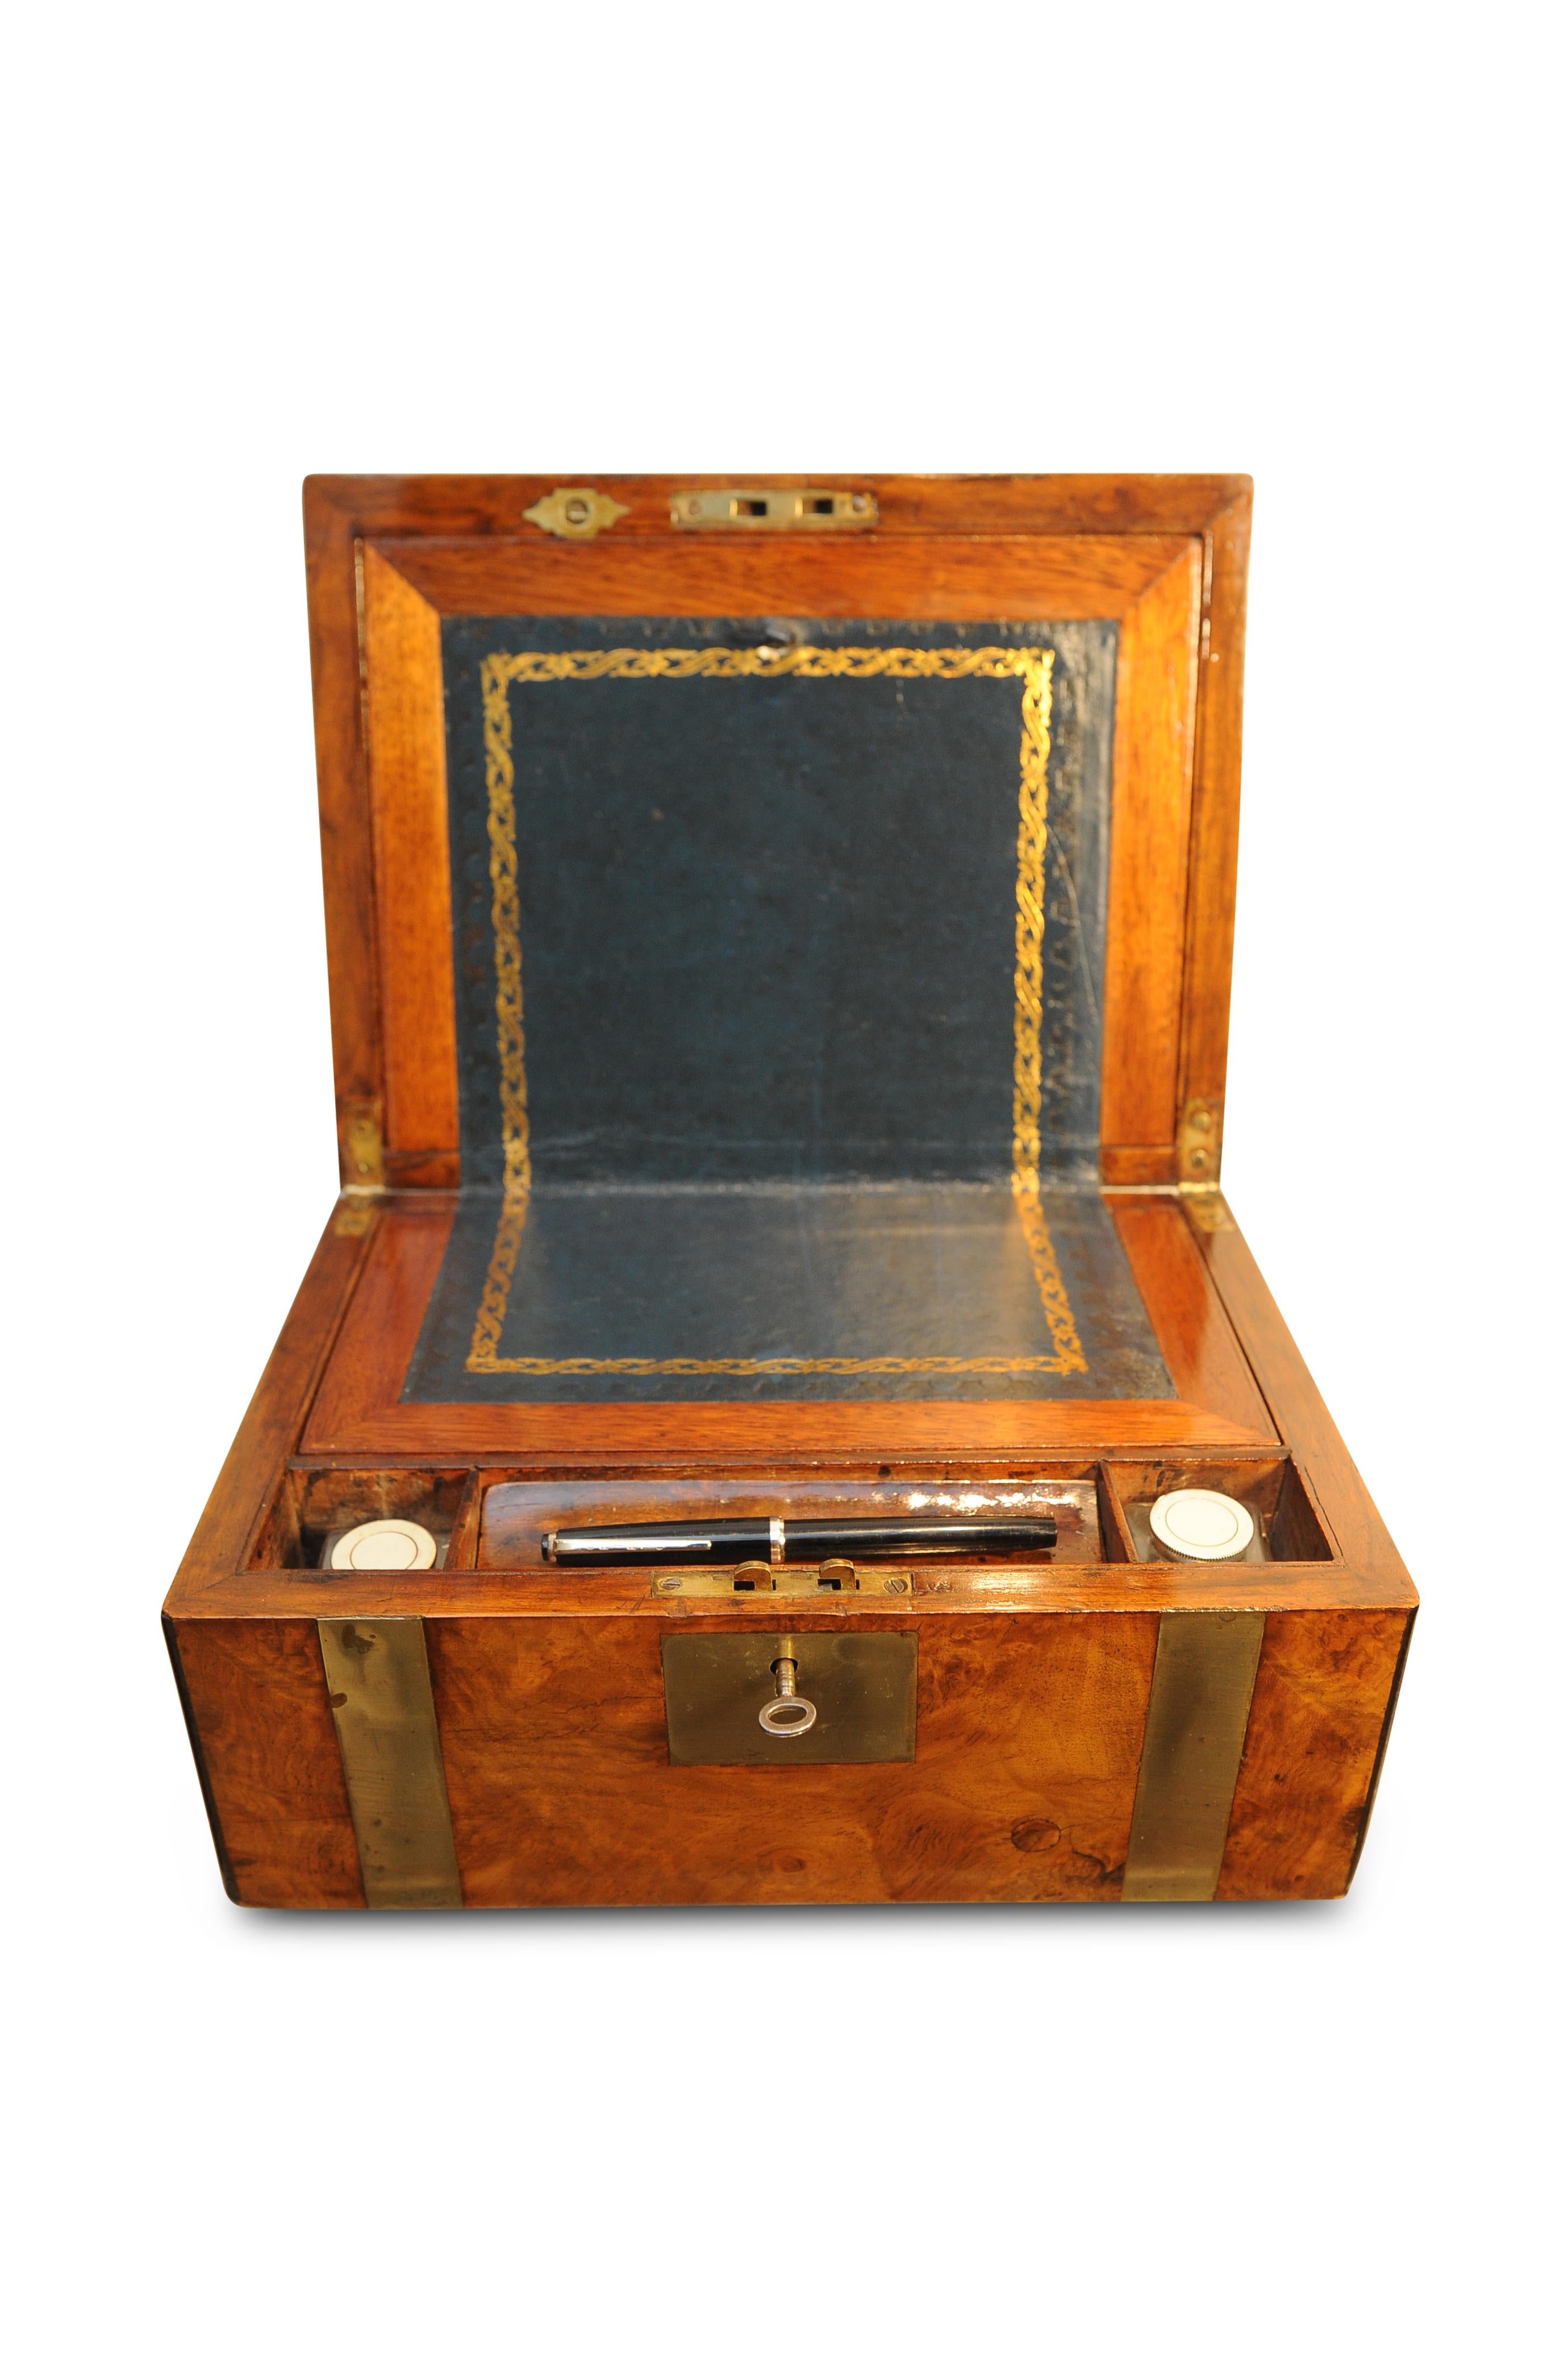 A Military Campaign brass bound walnut veneered writing slope with ebonised edging,
opening to reveal the usual fitted interior with tooled black leather skiver.
2 glass ink pots with silver plate lids in separate compartments.
1 key included for